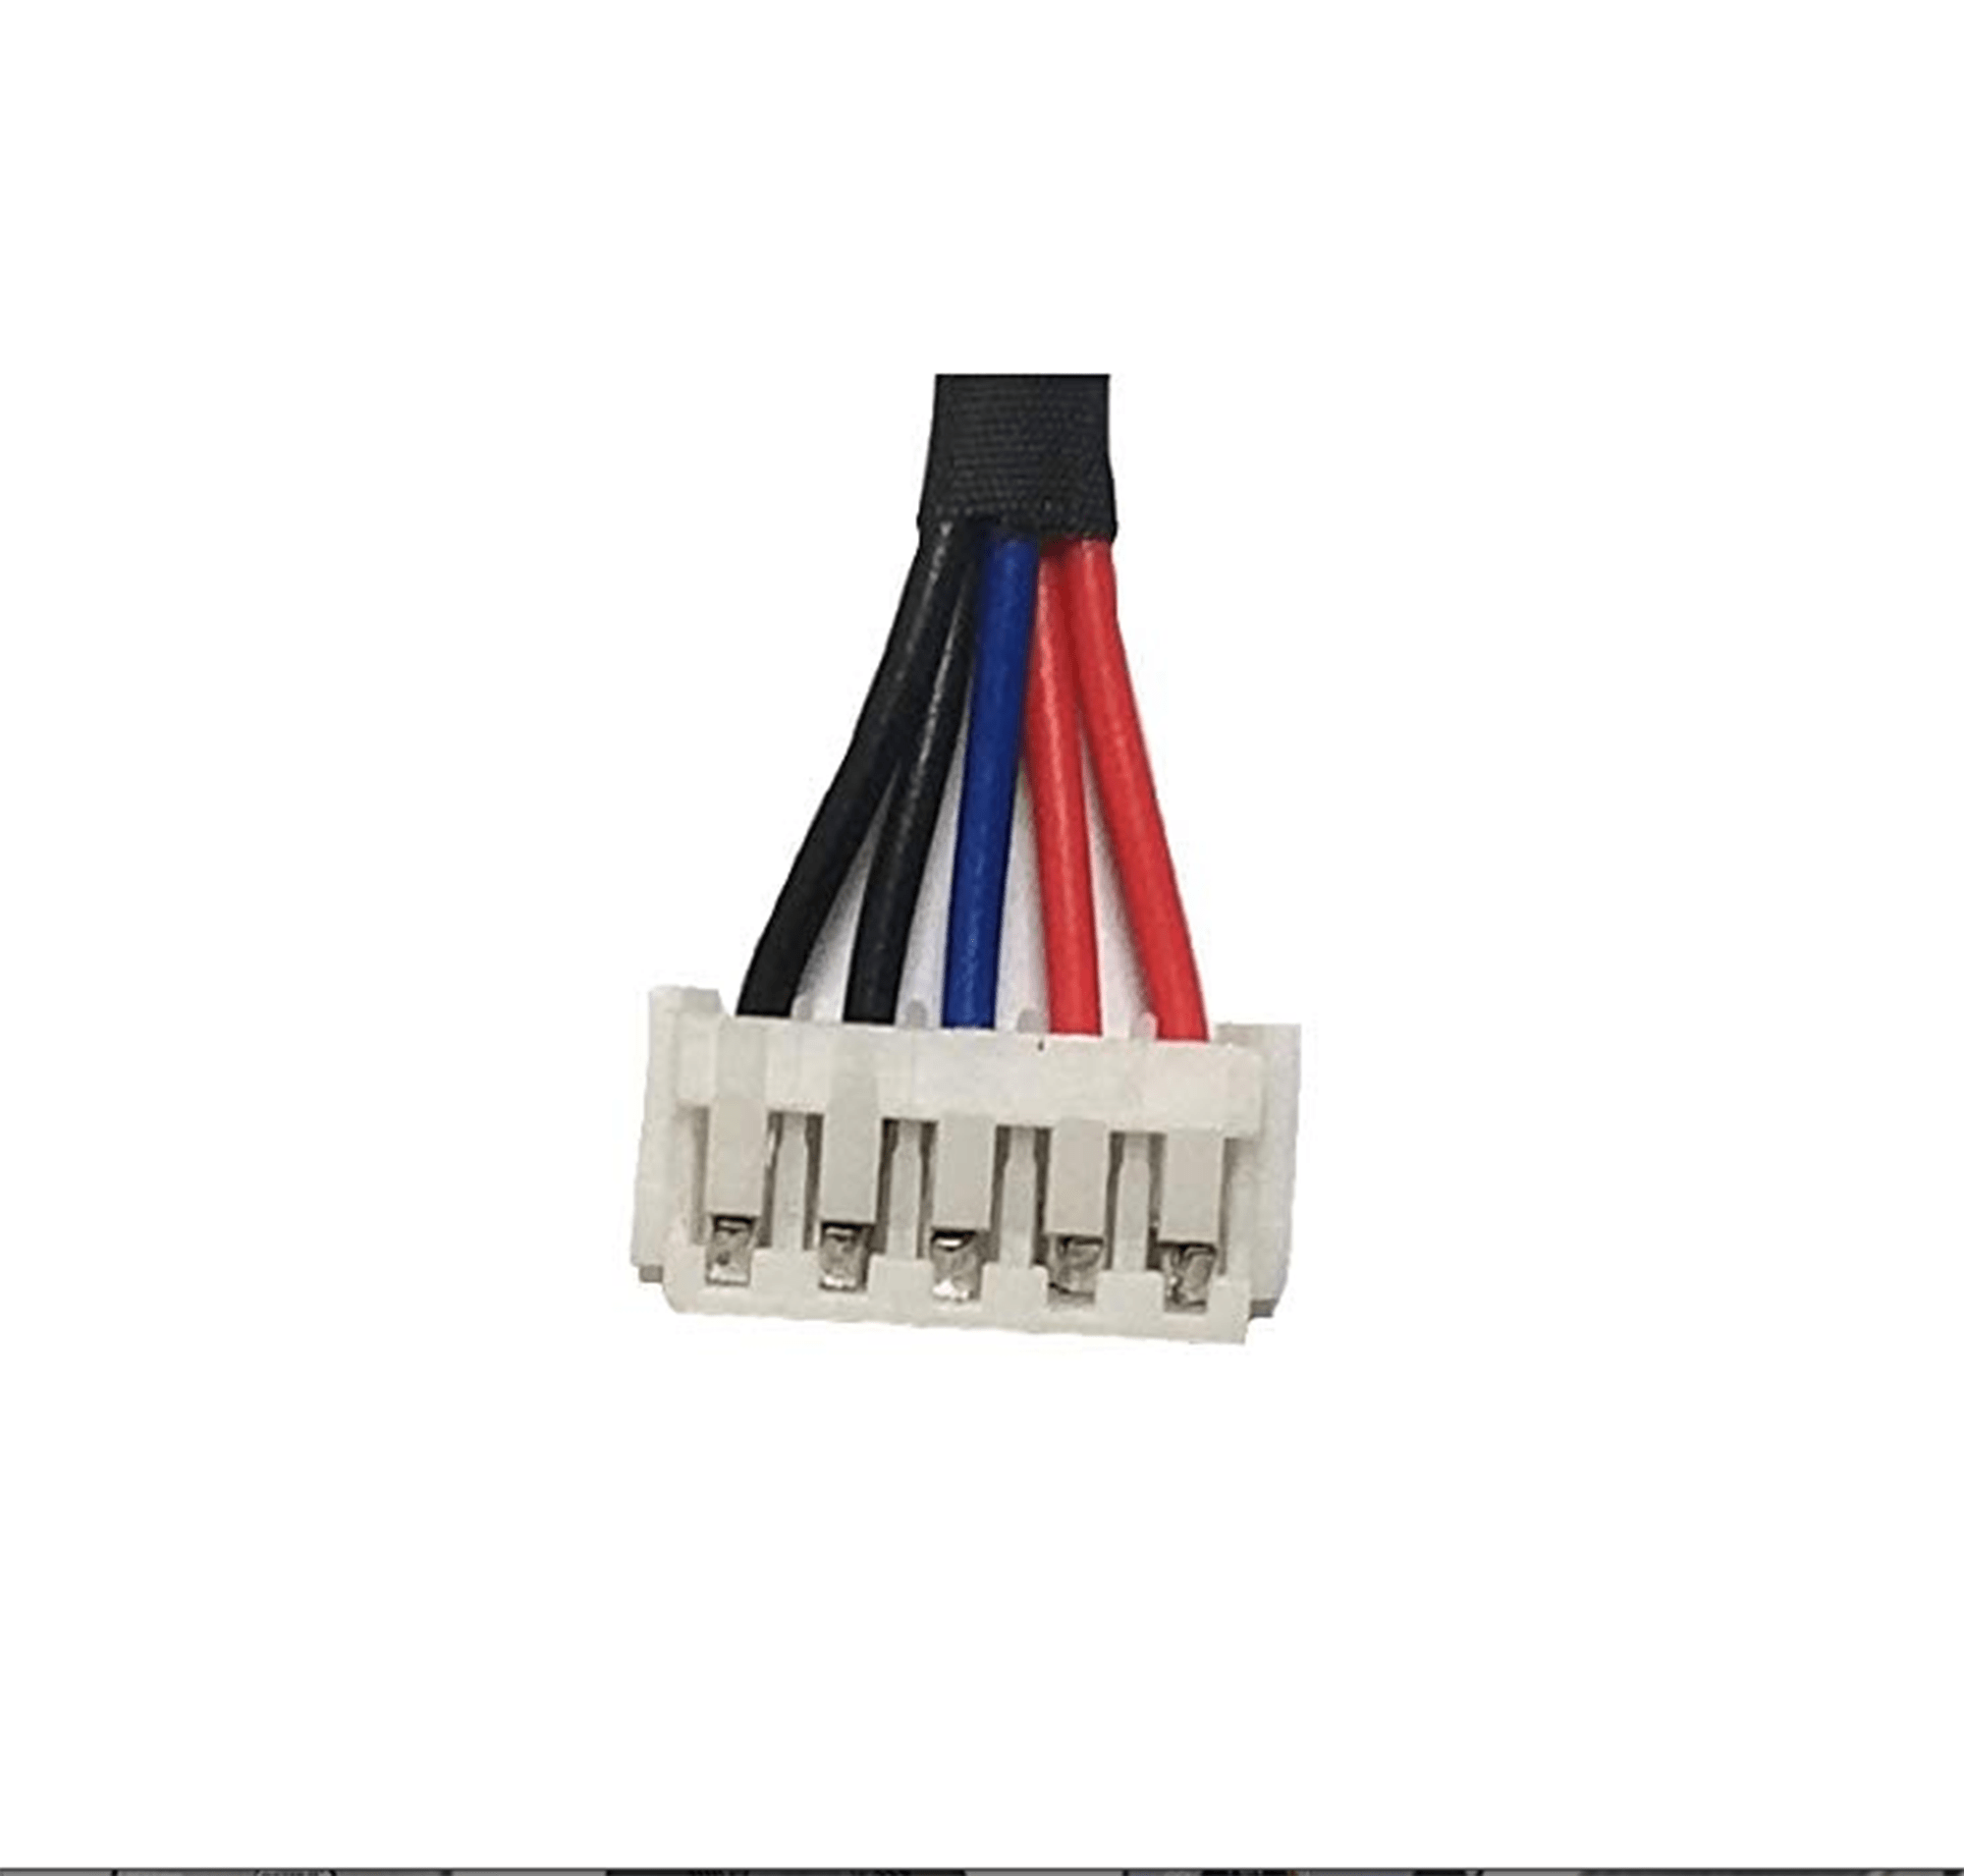 DC-in Jack for Lenovo Ideapad G700 G700-5937 G700-5938 IDEAPAD Z710 Z710-20250 G710 PN 202520 90202793, DC Power Jack Harness Port Connector Socket with Wire Cable.